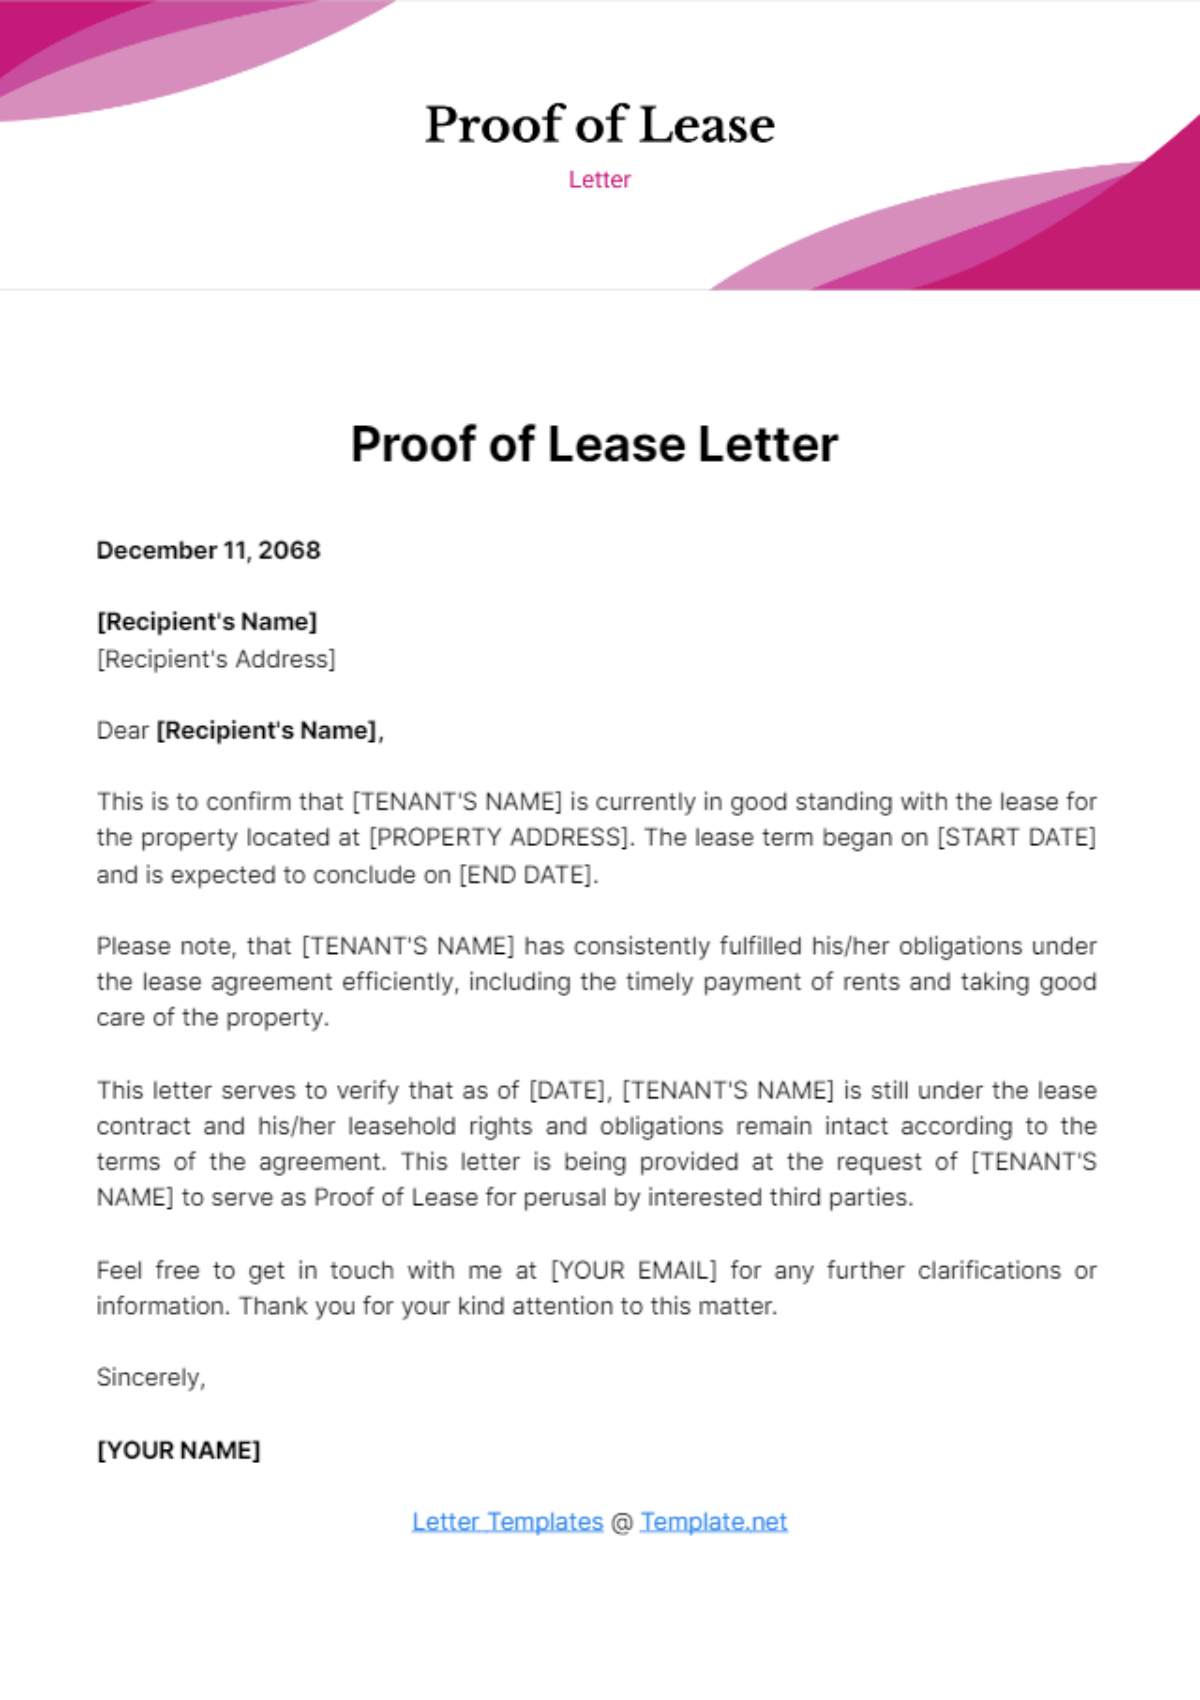 Free Proof of Lease Letter Template